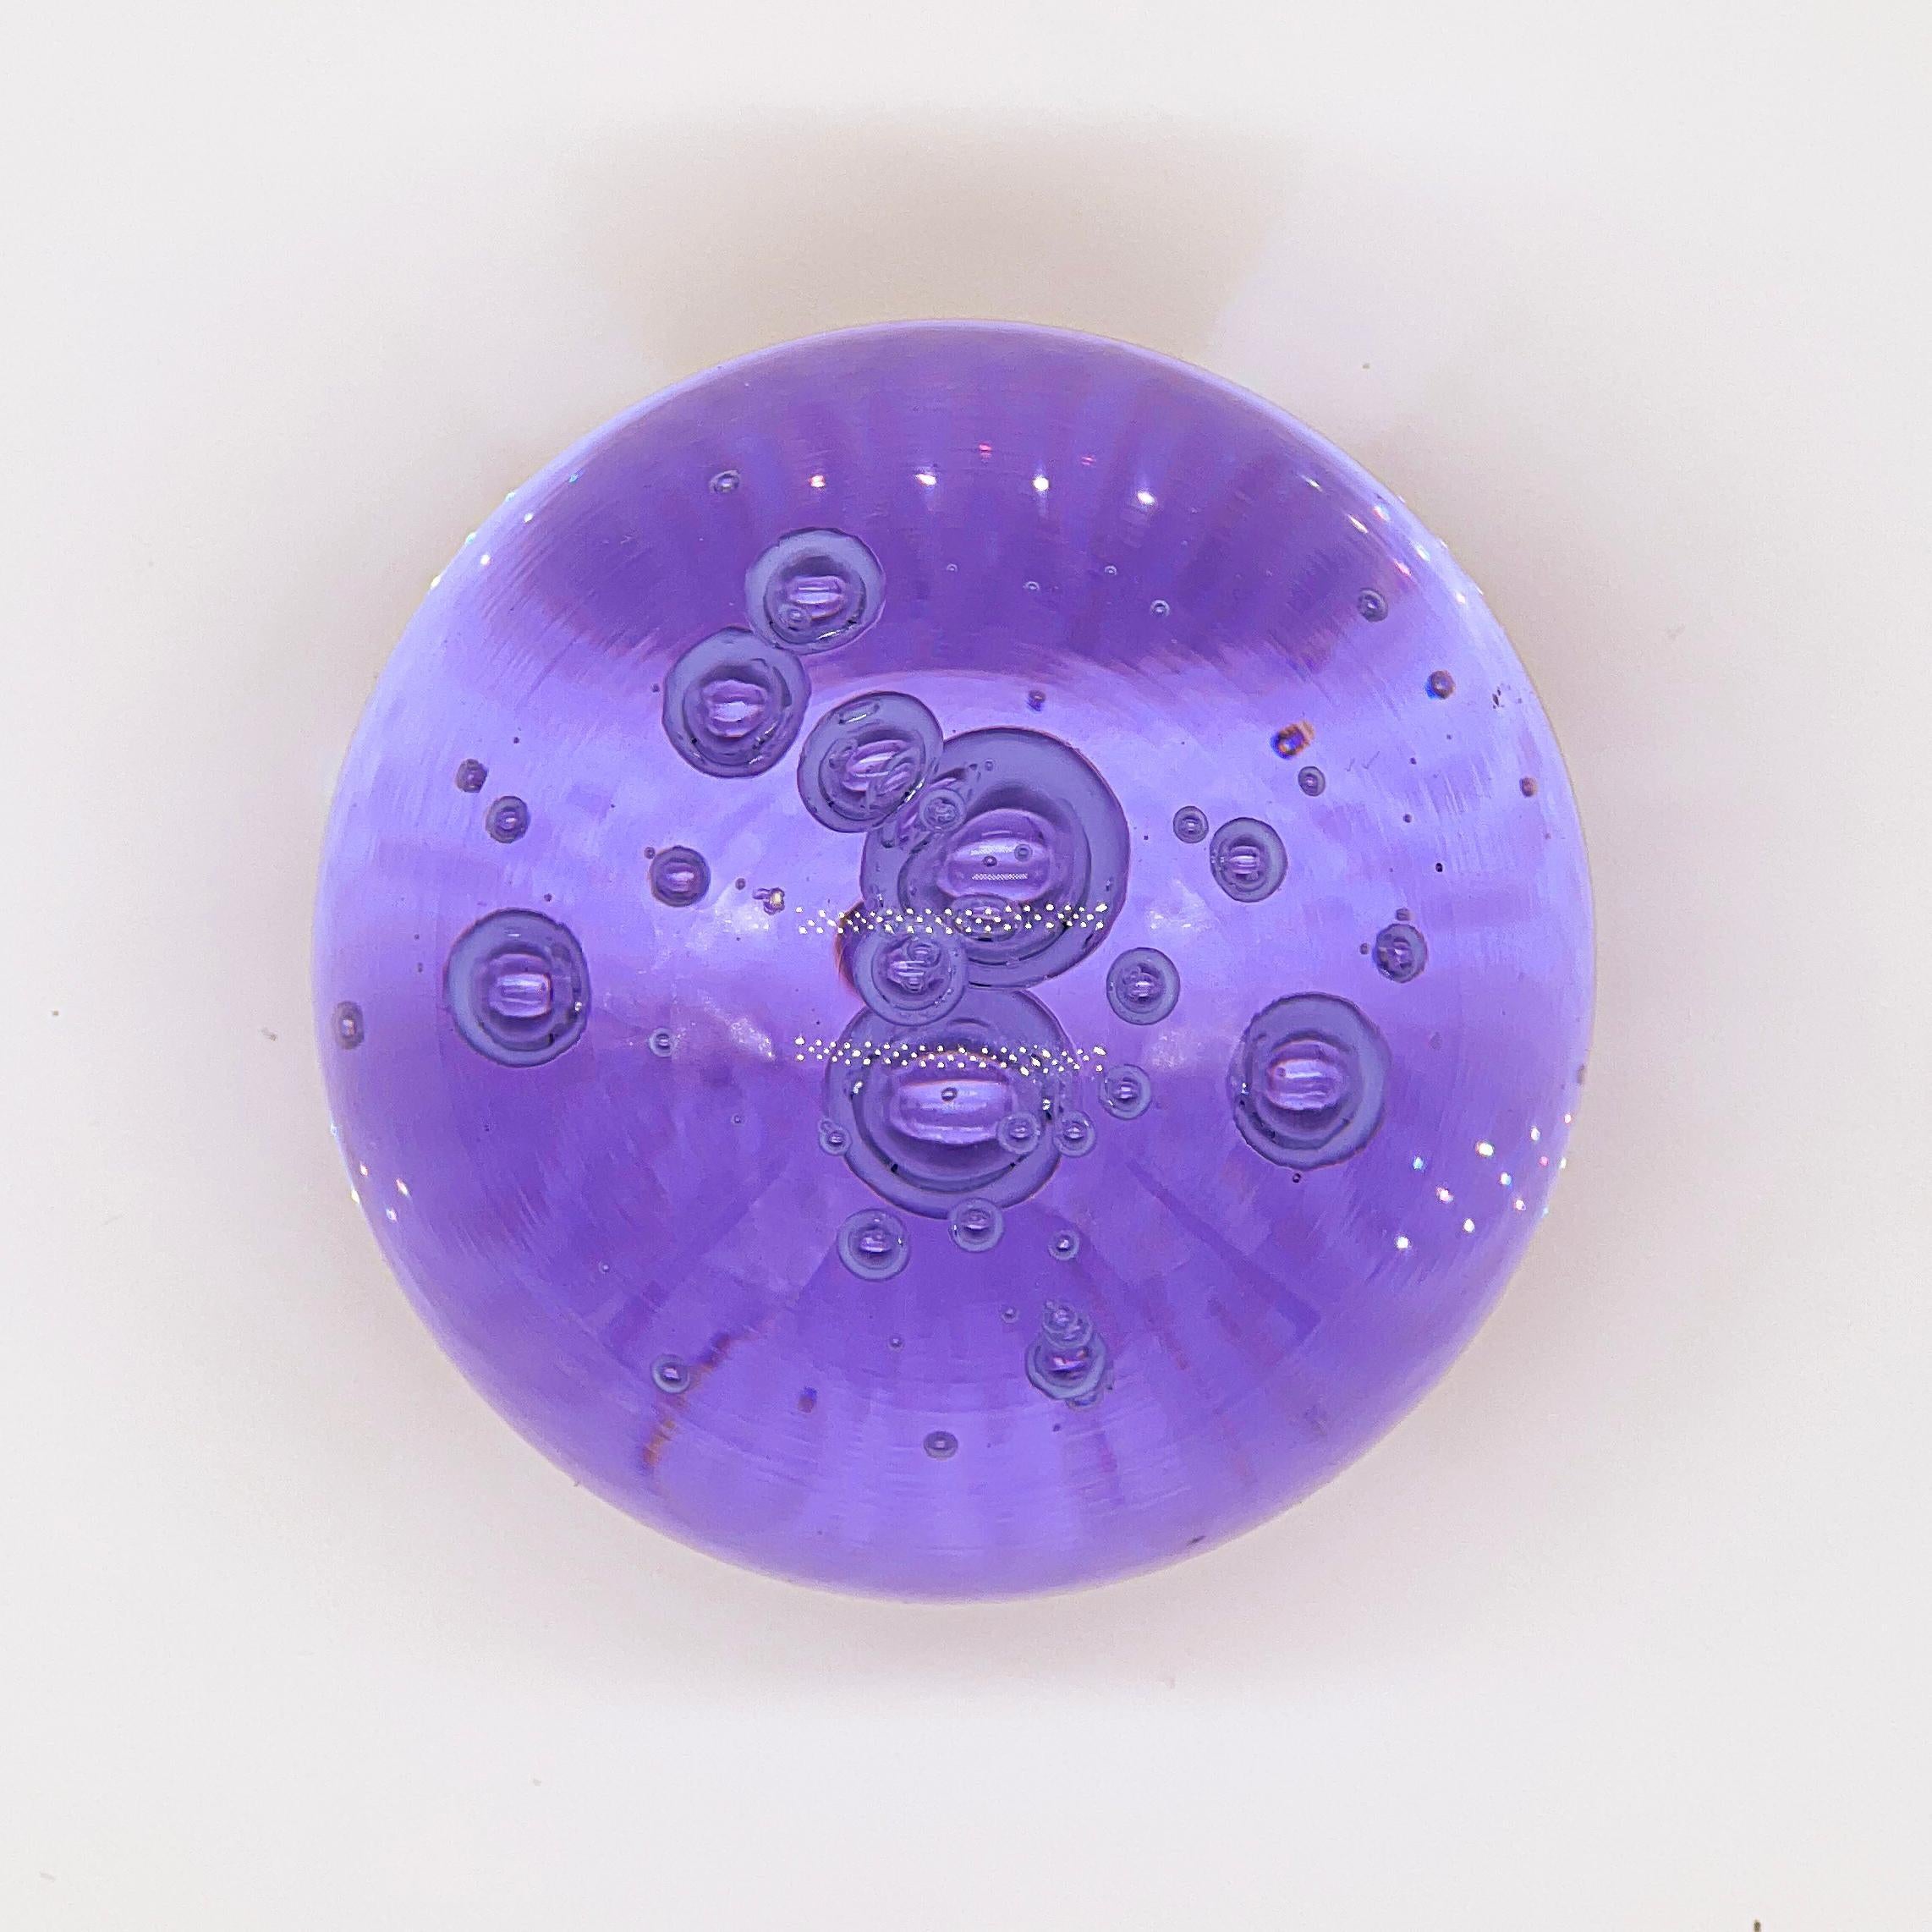 Vintage Murano paperweight in the shape of a sphere with a flat bottom to make it stand still. Made in a deep, vibrant hue of purple glass, it has included bubbles that confer it depth and volume. It is a really attractive object that generates a